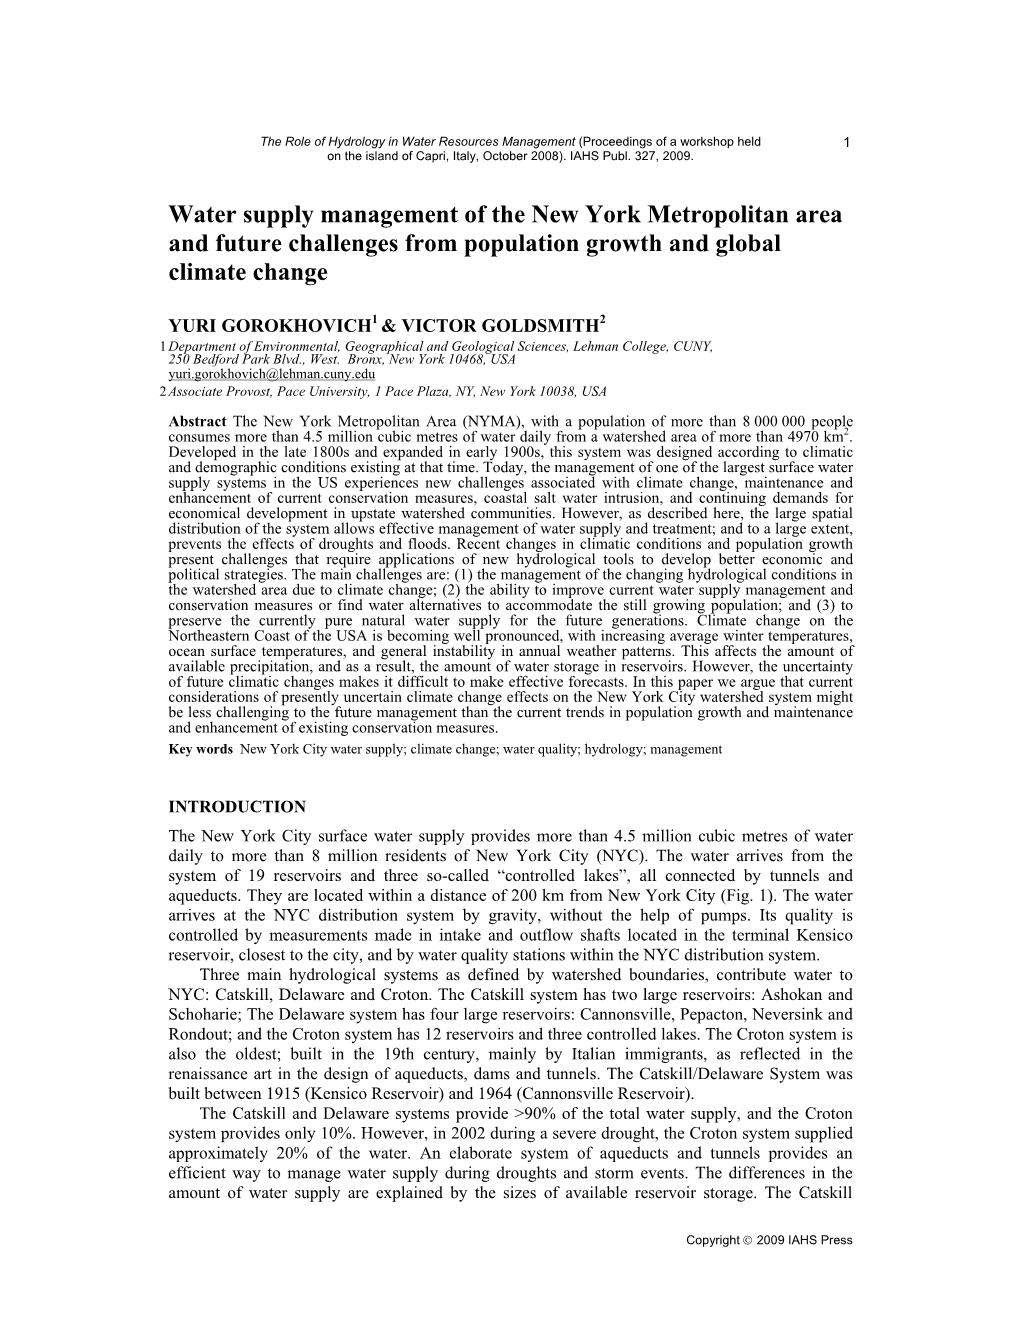 Water Supply Management of the New York Metropolitan Area and Future Challenges from Population Growth and Global Climate Change